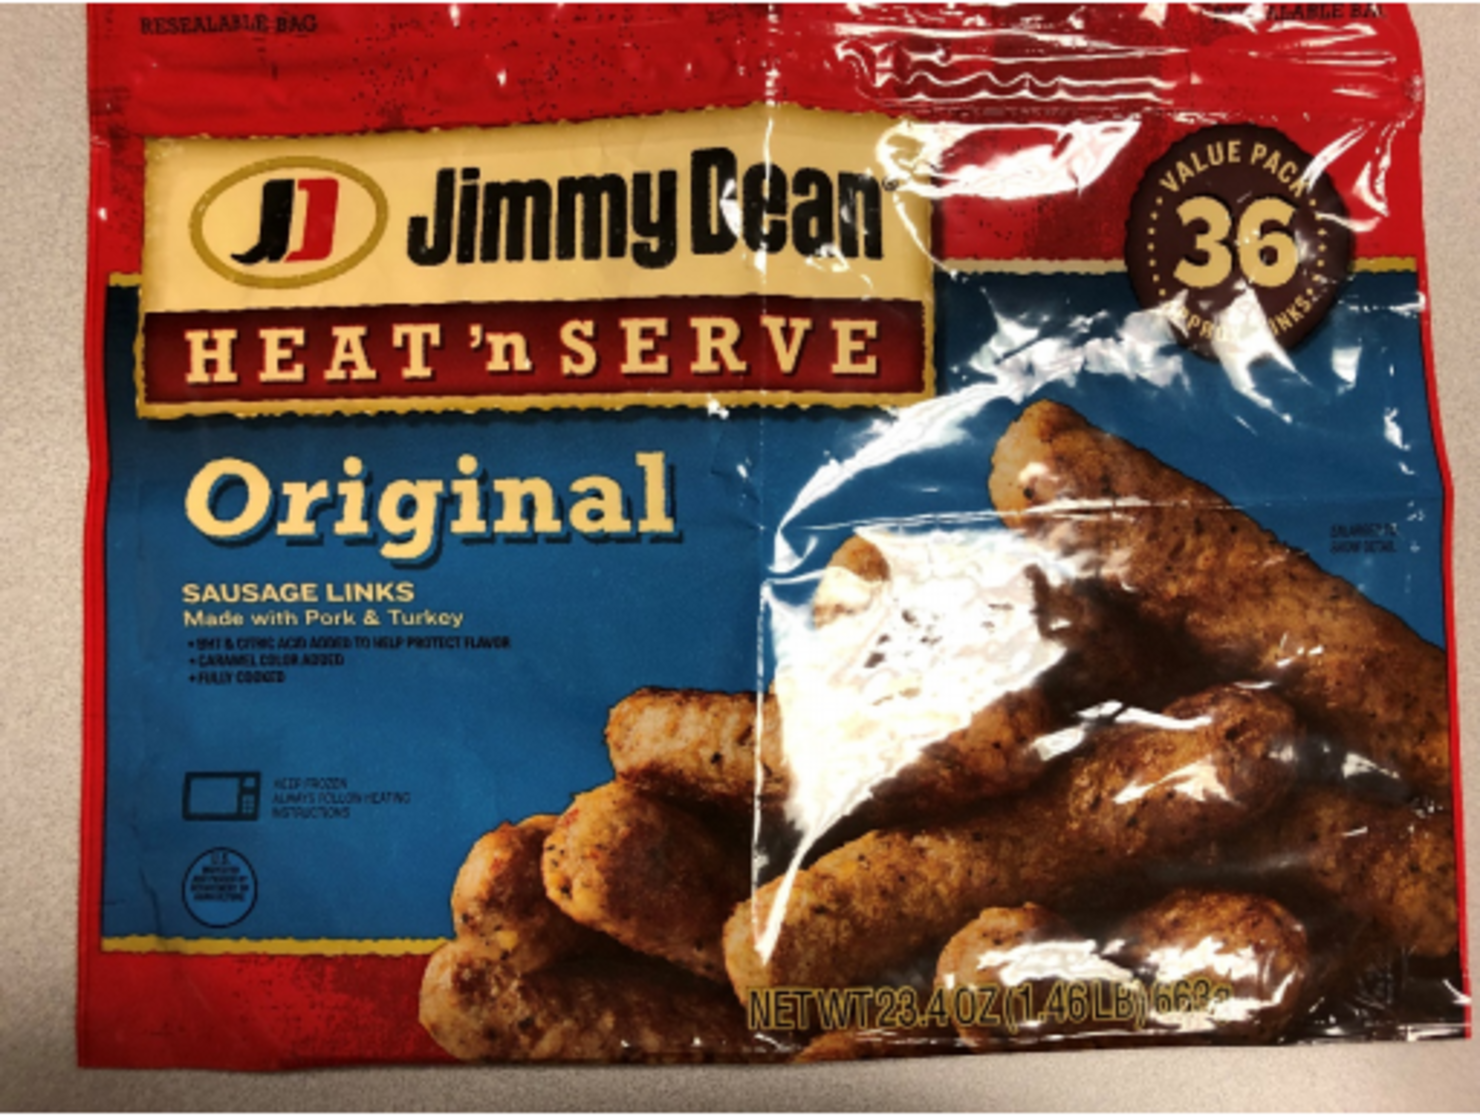 nearly 30,000 pounds of Jimmy Dean Sausage being recalled due to metal shavings